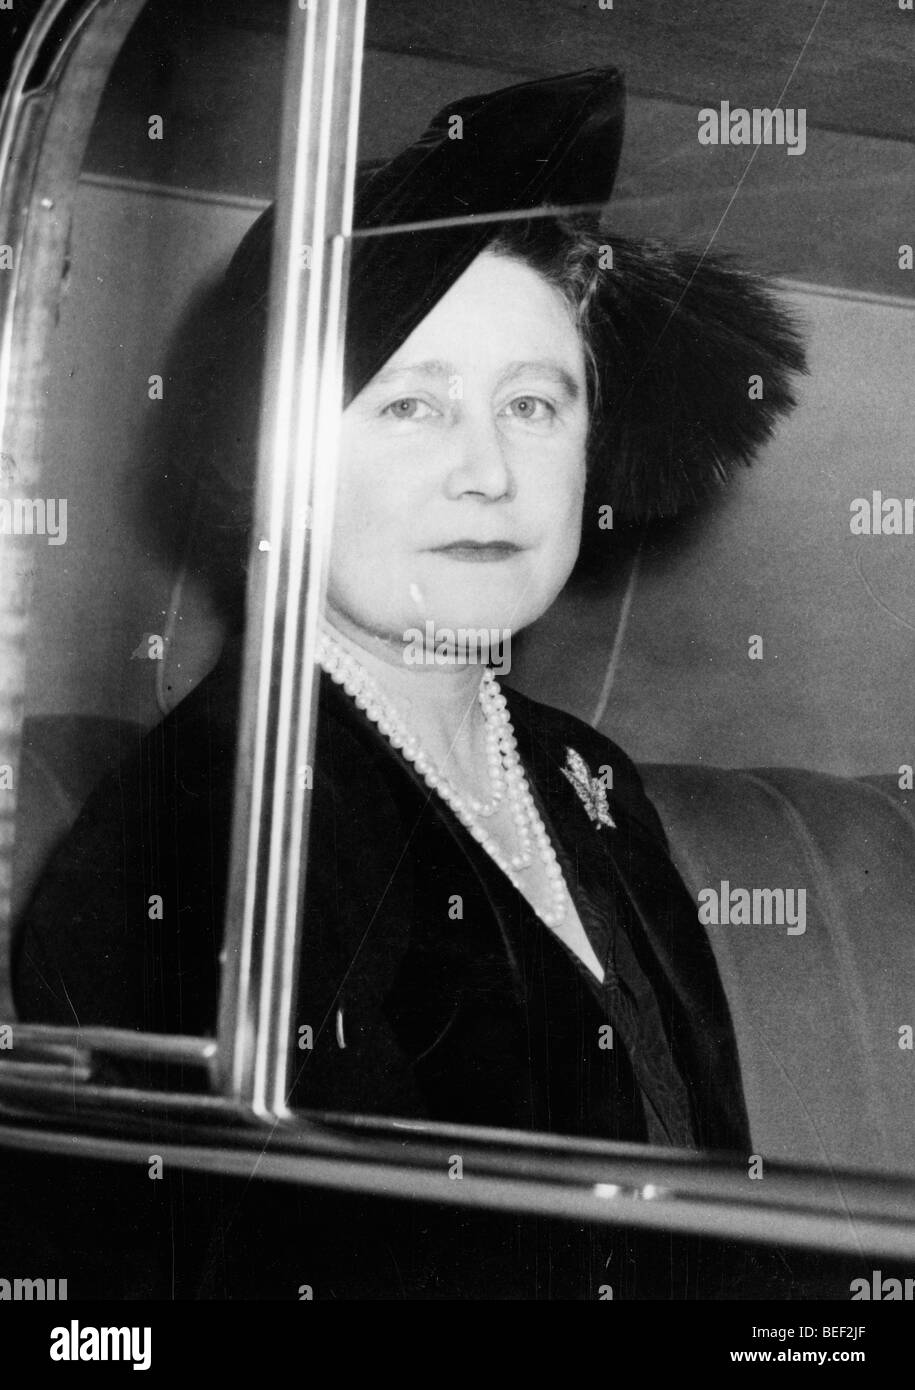 The Queen Mother, Elizabeth Bowes-Lyon, in the 1970's. Stock Photo